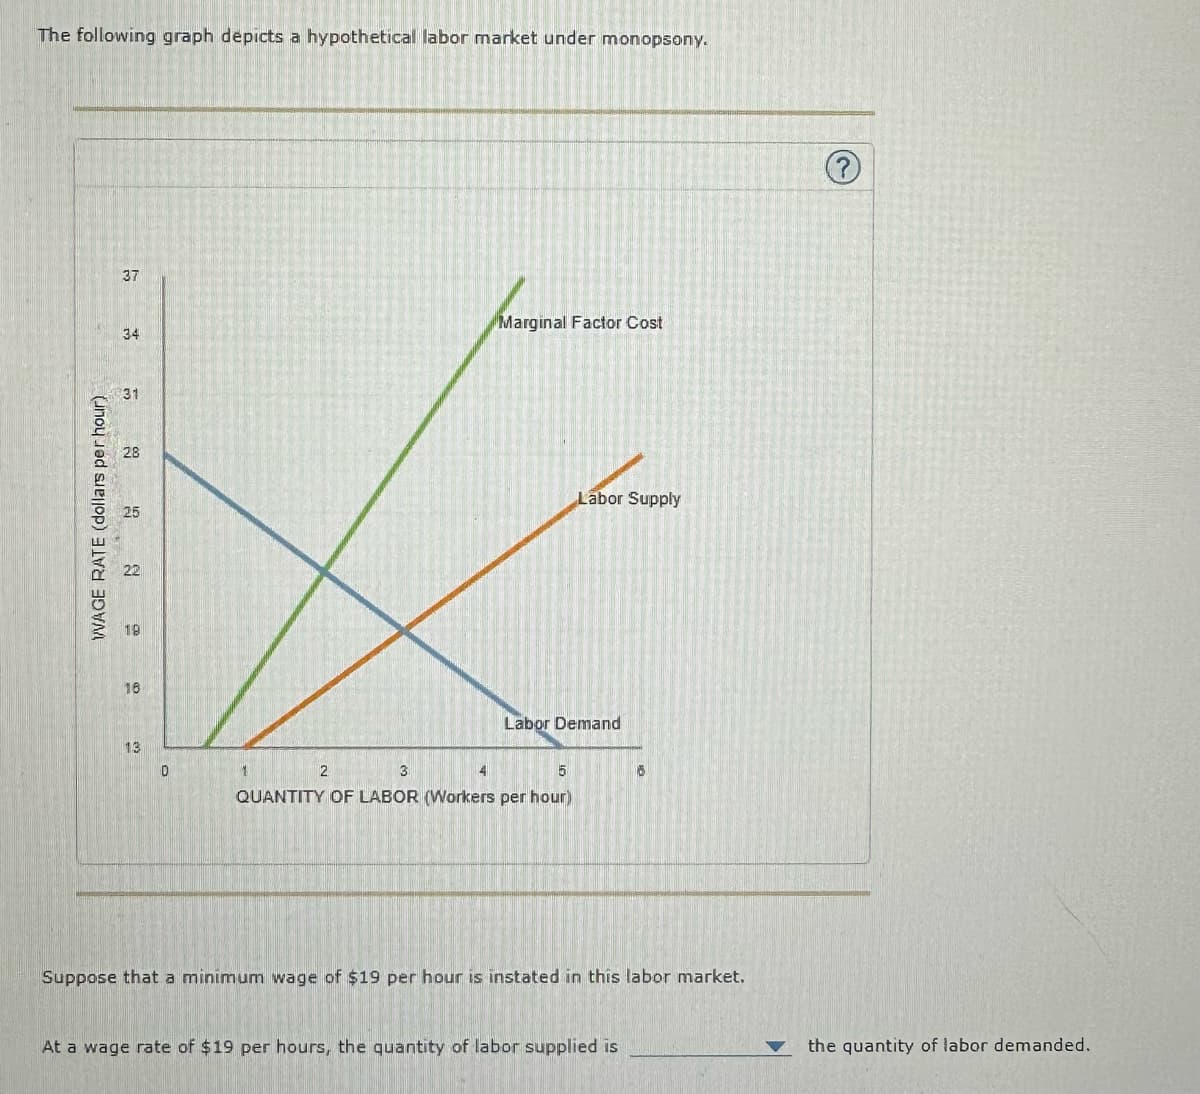 The following graph depicts a hypothetical labor market under monopsony.
WAGE RATE (dollars per hour)
37
34
Marginal Factor Cost
31
28
Labor Supply
25
22
19
16
13
0
2
3
Labor Demand
5
QUANTITY OF LABOR (Workers per hour)
Suppose that a minimum wage of $19 per hour is instated in this labor market.
At a wage rate of $19 per hours, the quantity of labor supplied is
?
the quantity of labor demanded.